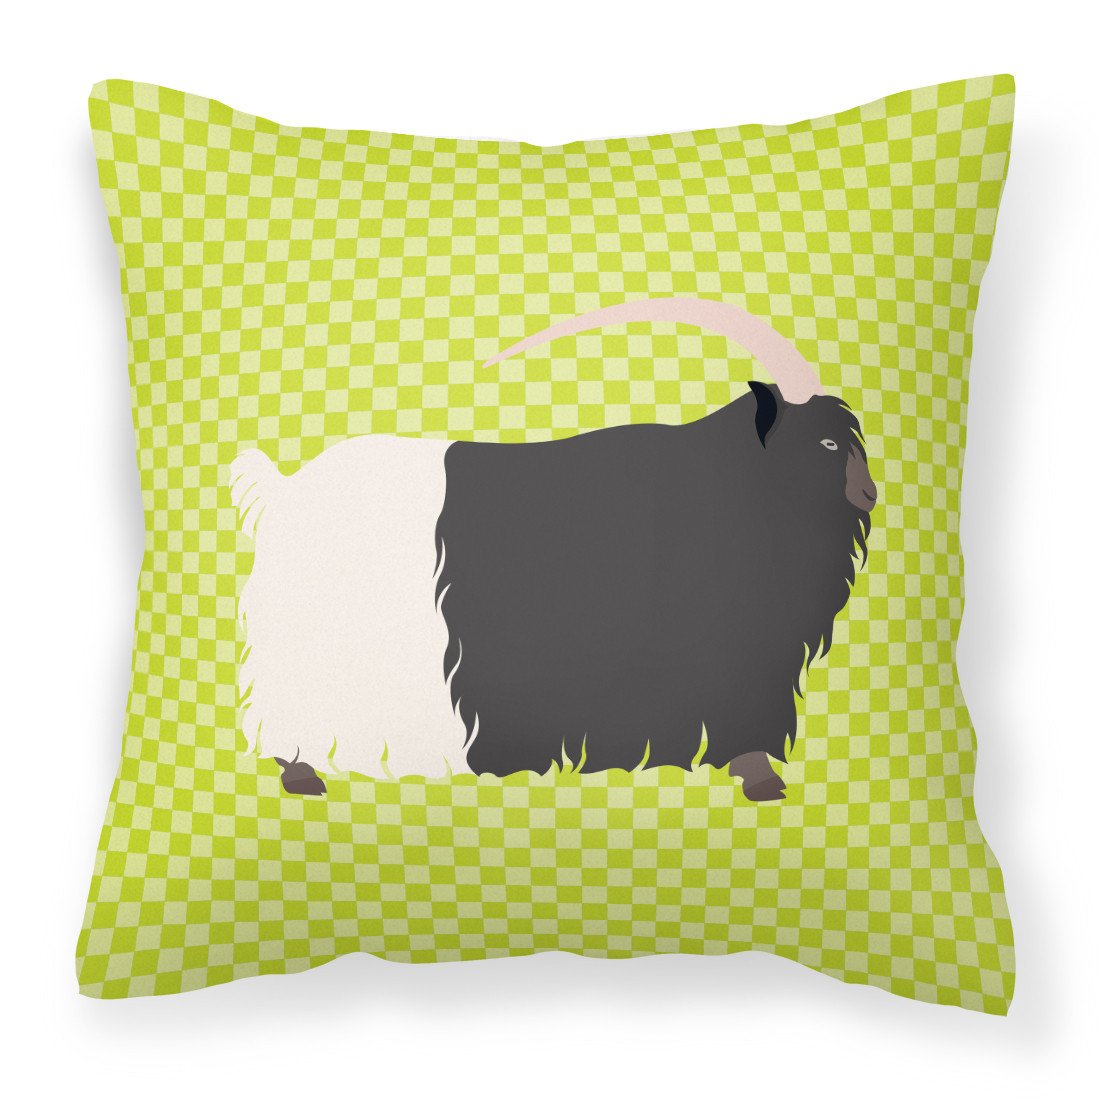 Welsh Black-Necked Goat Green Fabric Decorative Pillow BB7713PW1818 by Caroline's Treasures